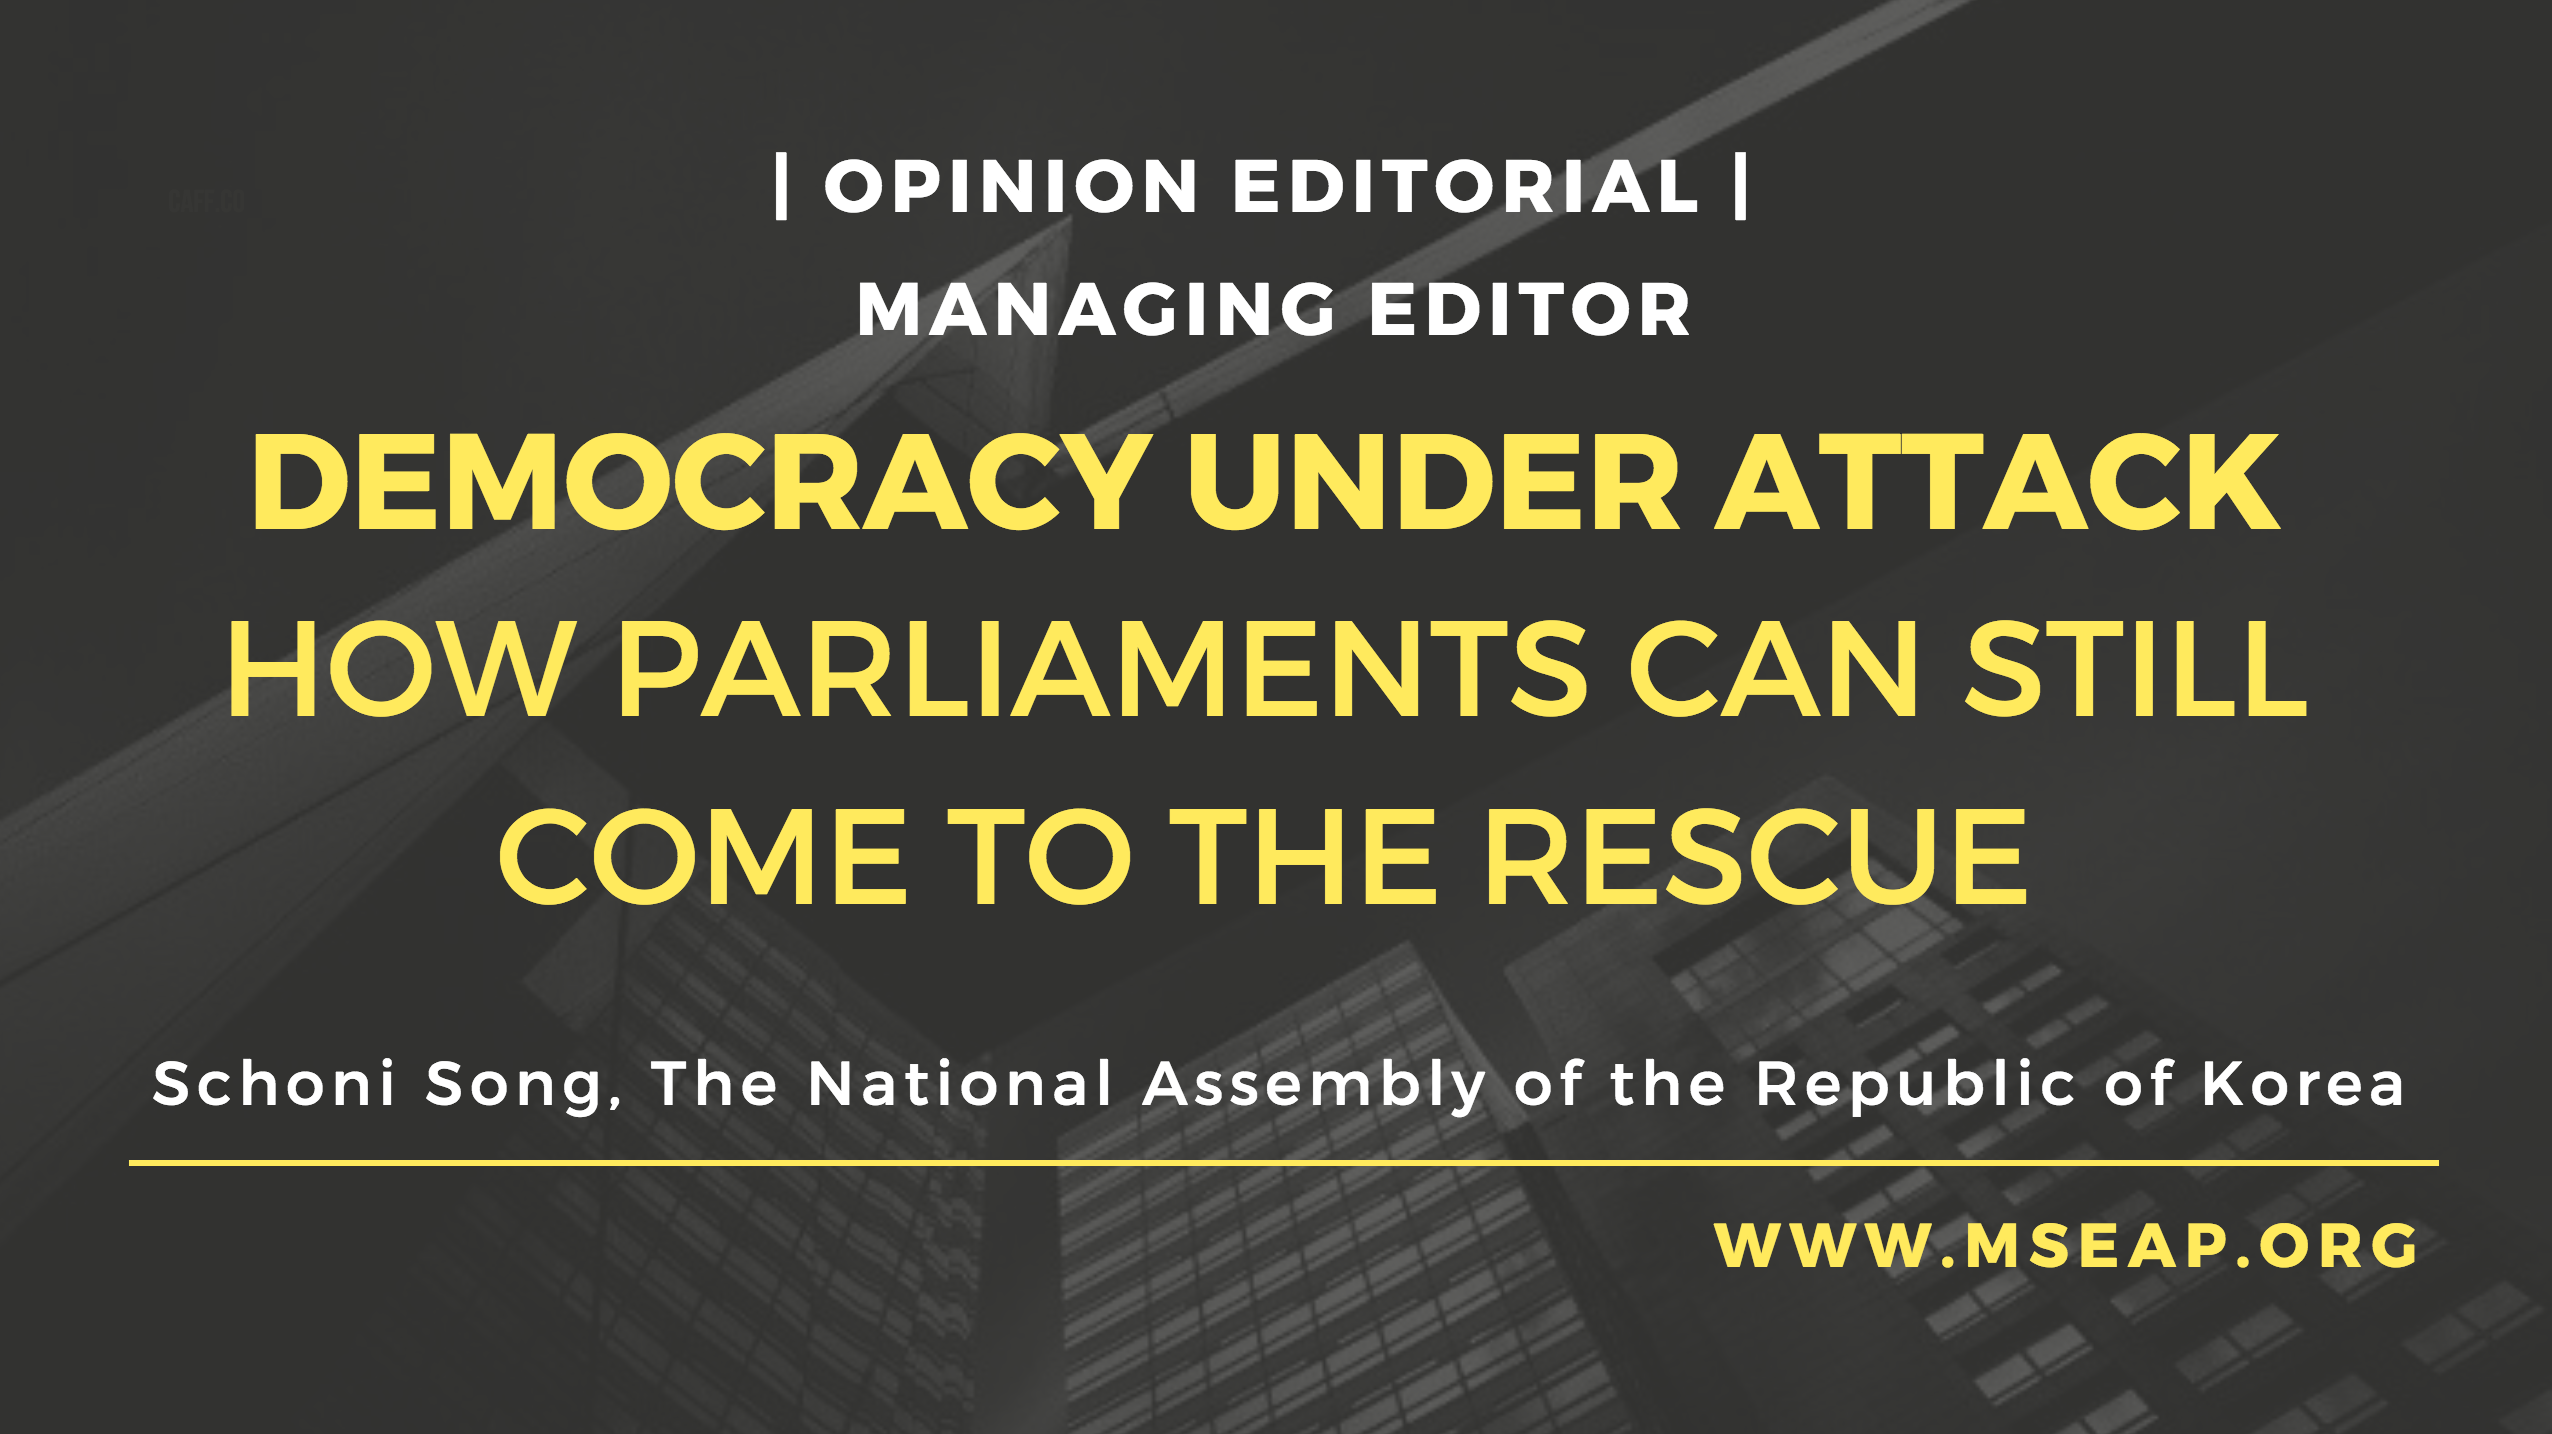 [Opinion Editorial] Democracy under attack: how parliaments can still come to the rescue